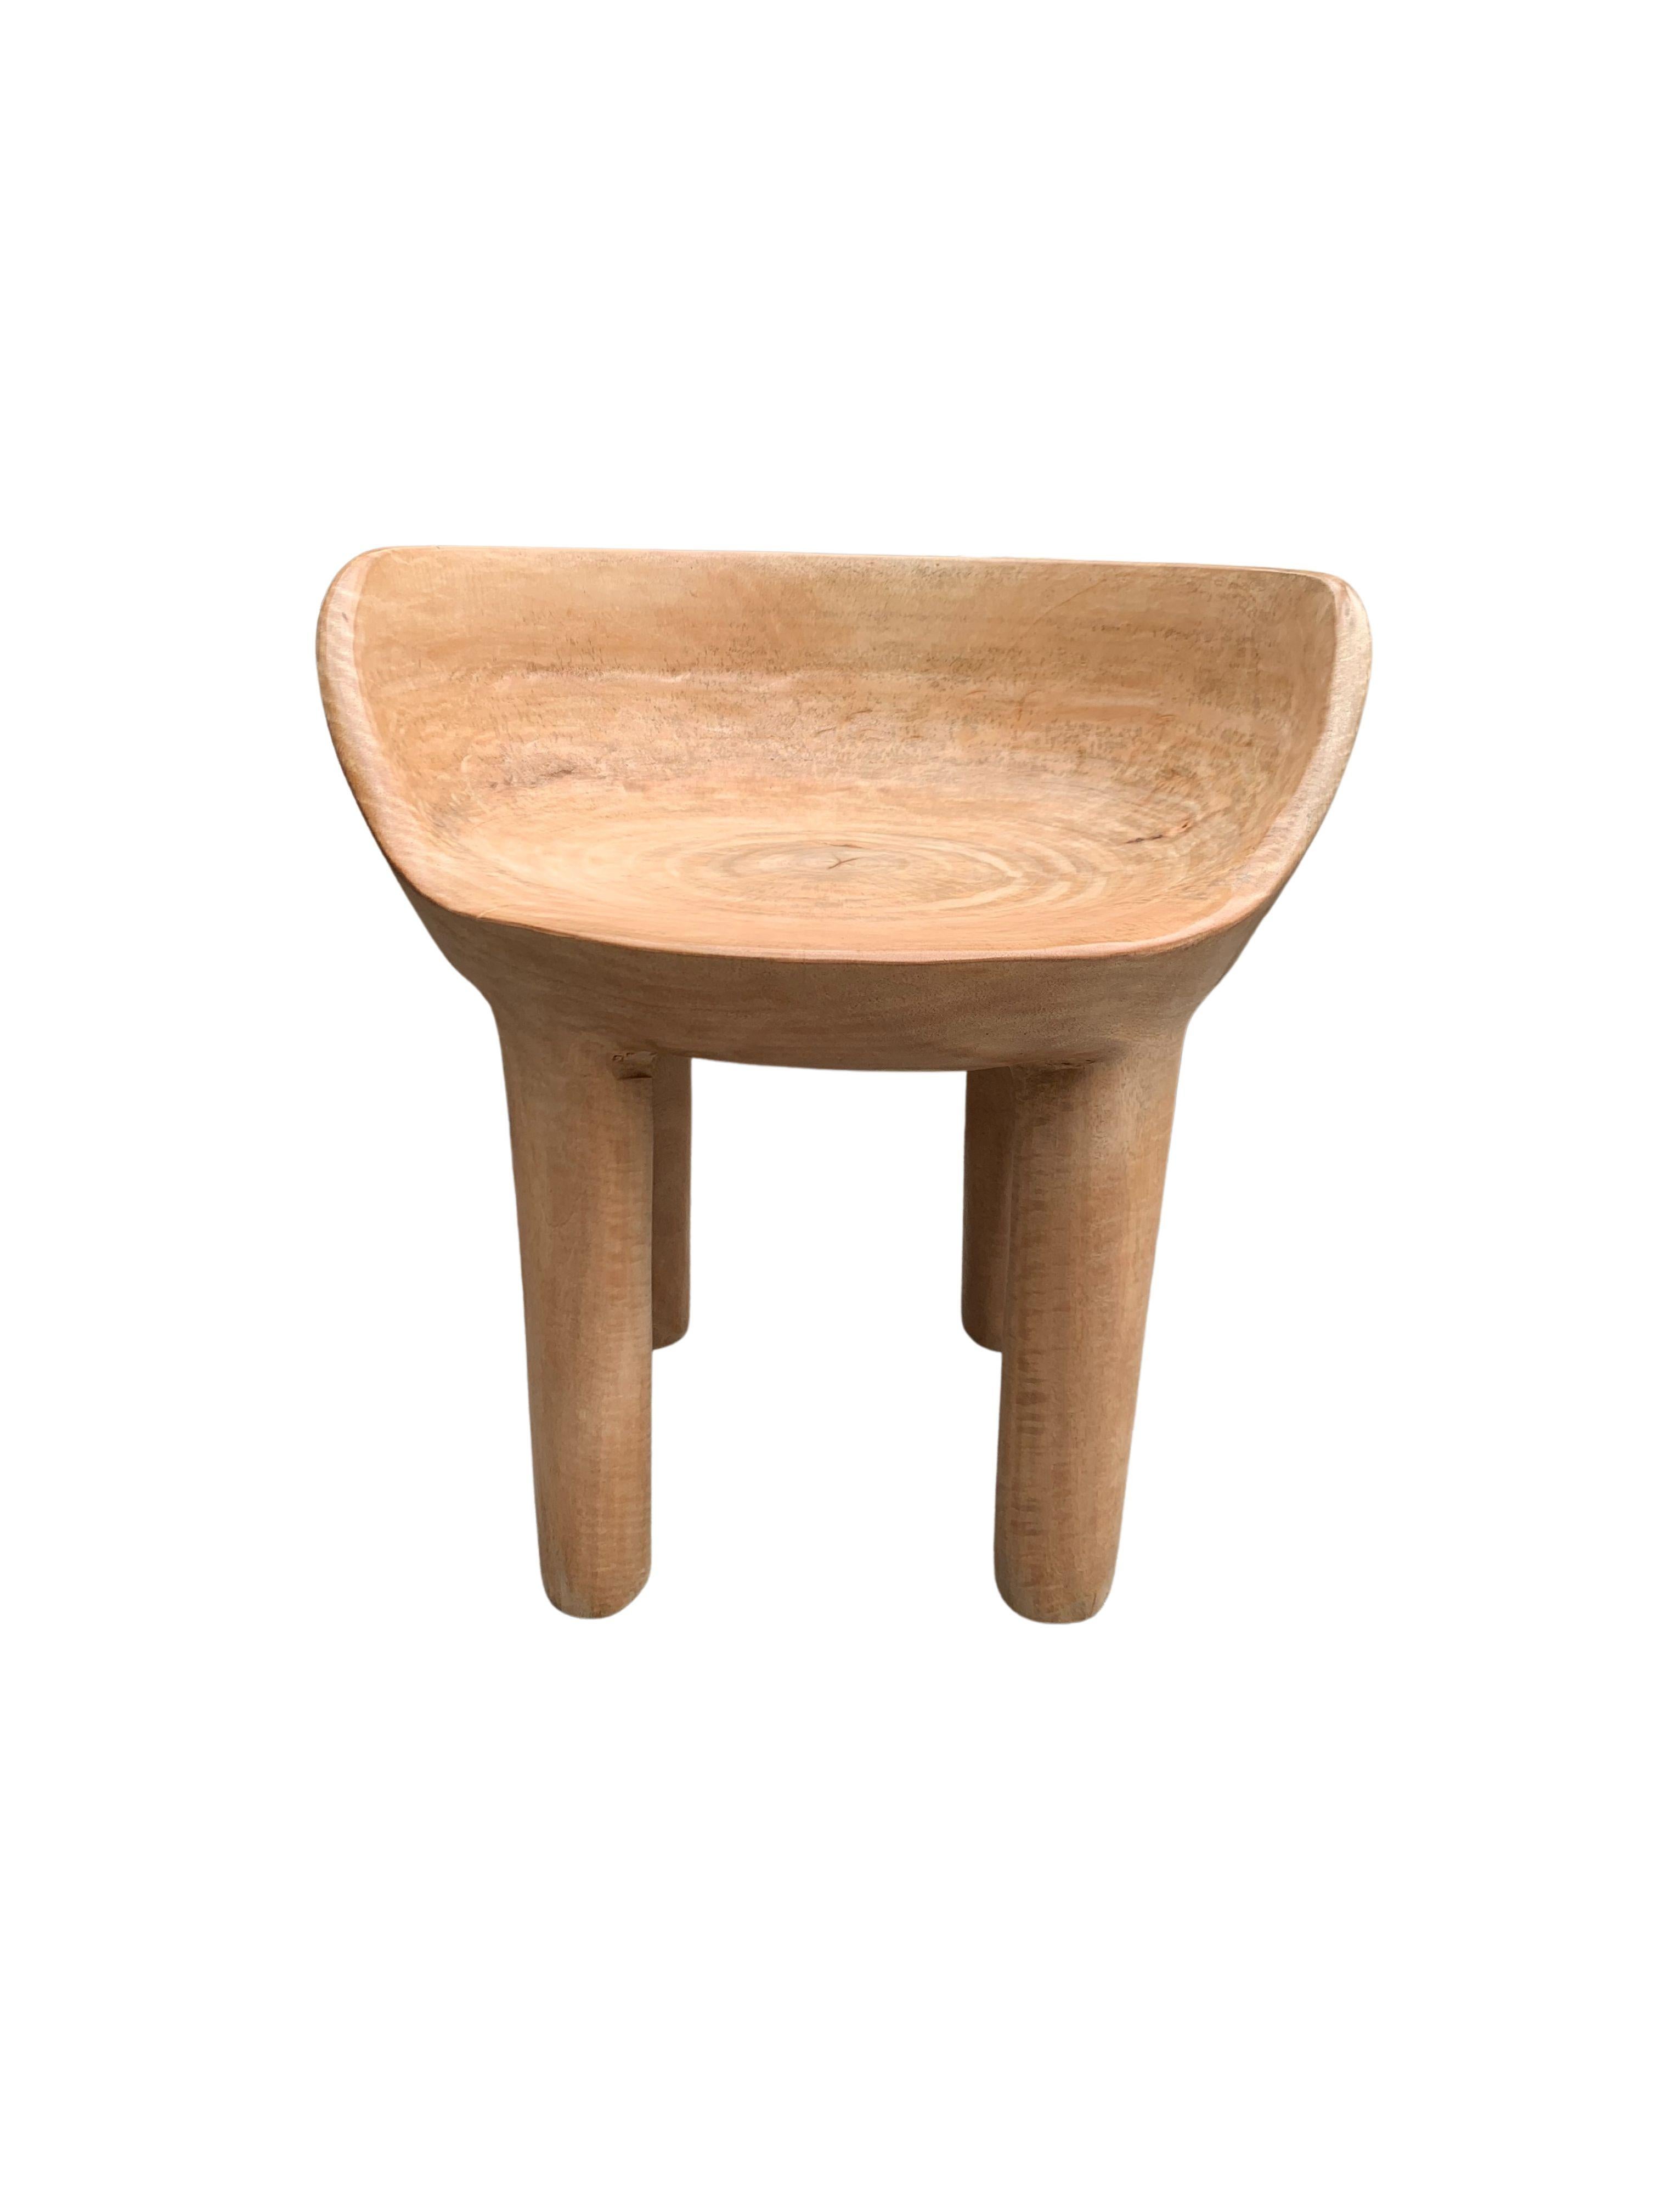 This wonderfully sculptural chair was crafted from a single block of mango wood. The chair sits on 4 slender legs. Its neutral pigment makes it perfect for any space. A uniquely sculptural and versatile piece certain to invoke conversation. This